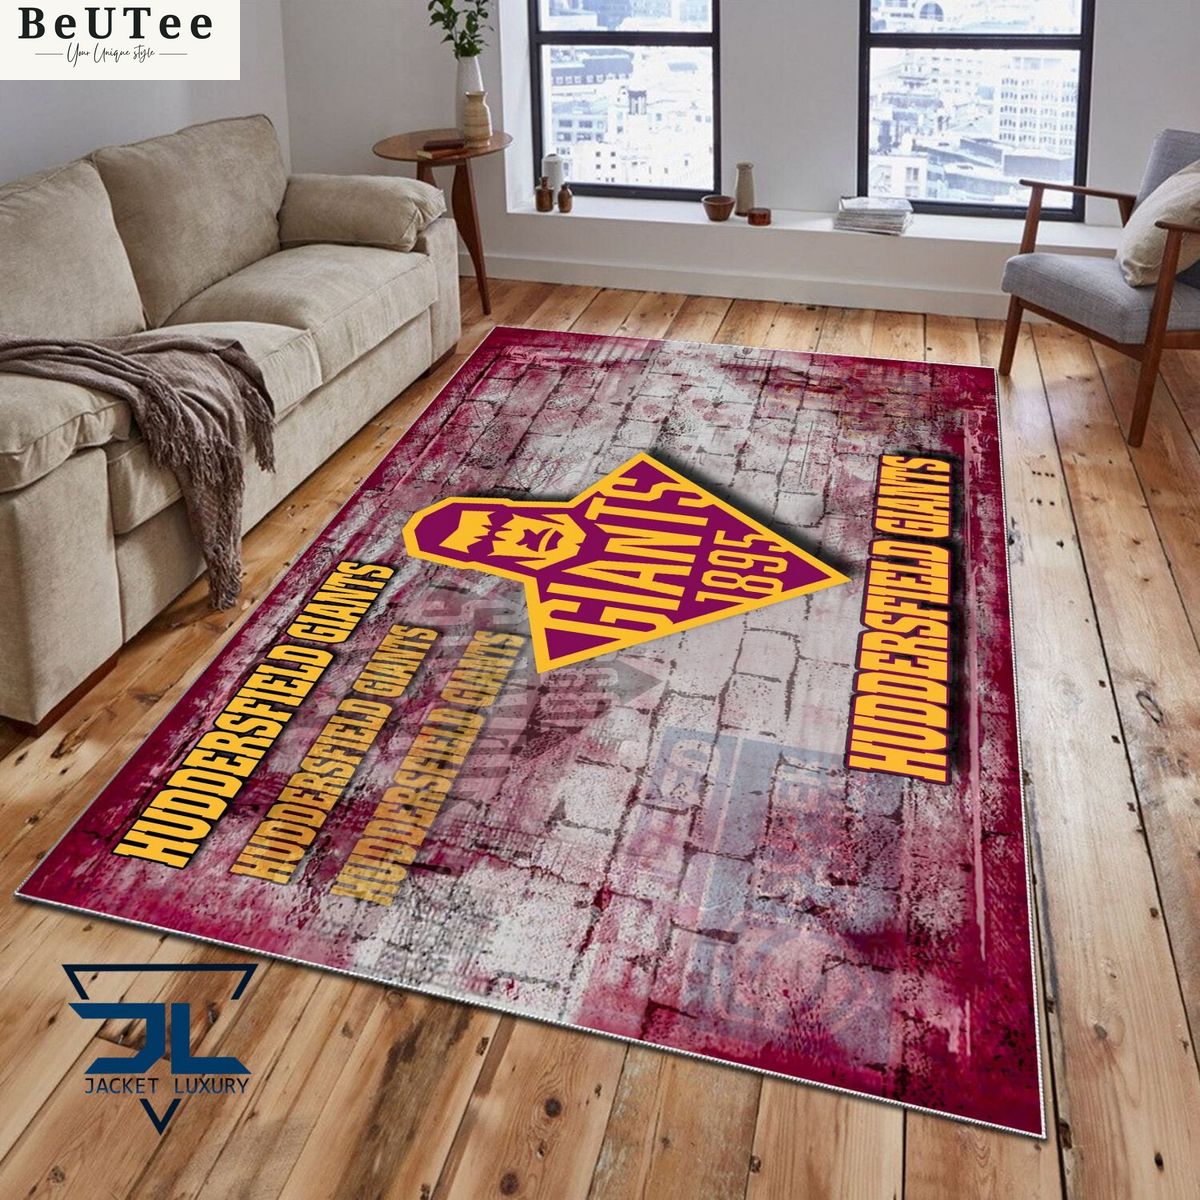 Huddersfield Giants Super League Rugby Carpet Rug Nice Pic